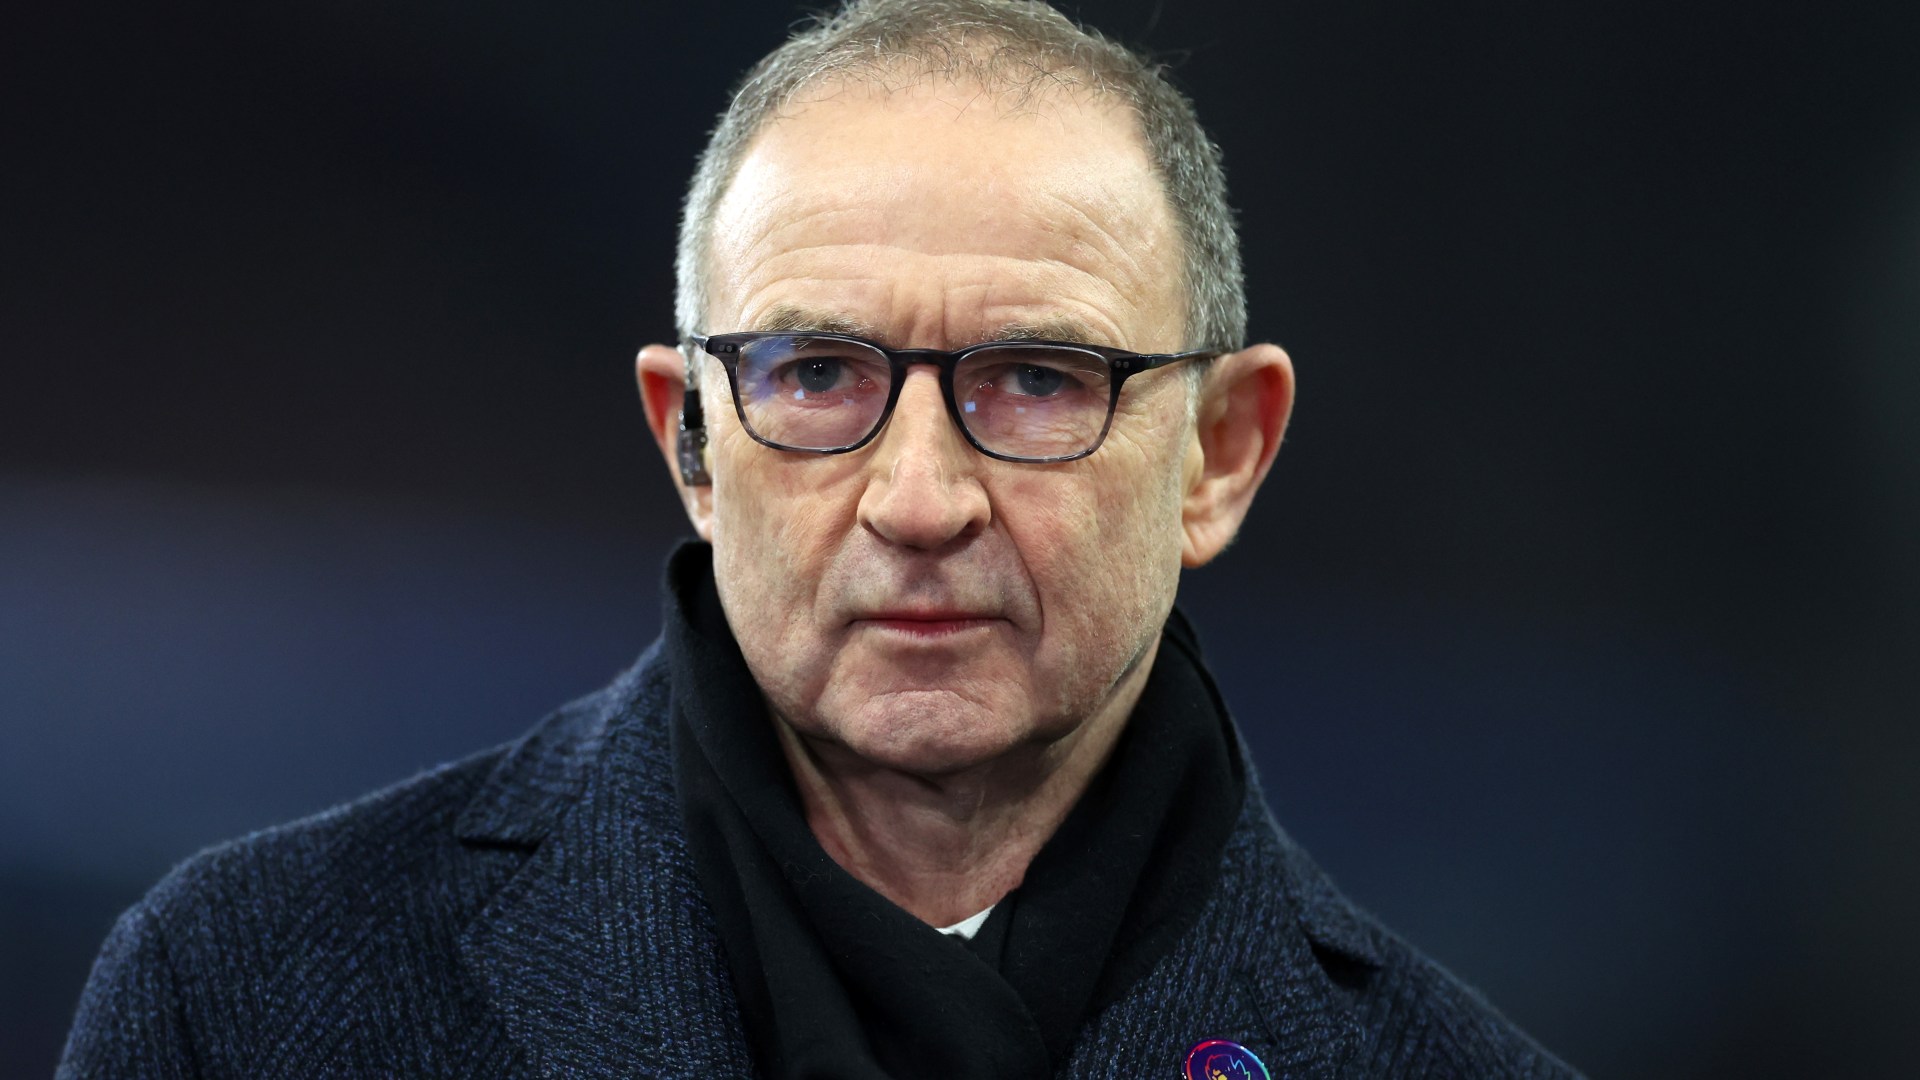 Martin O’Neill, 72, ‘closes in on astonishing managers job in Europe’ weeks after accepting career was over [Video]